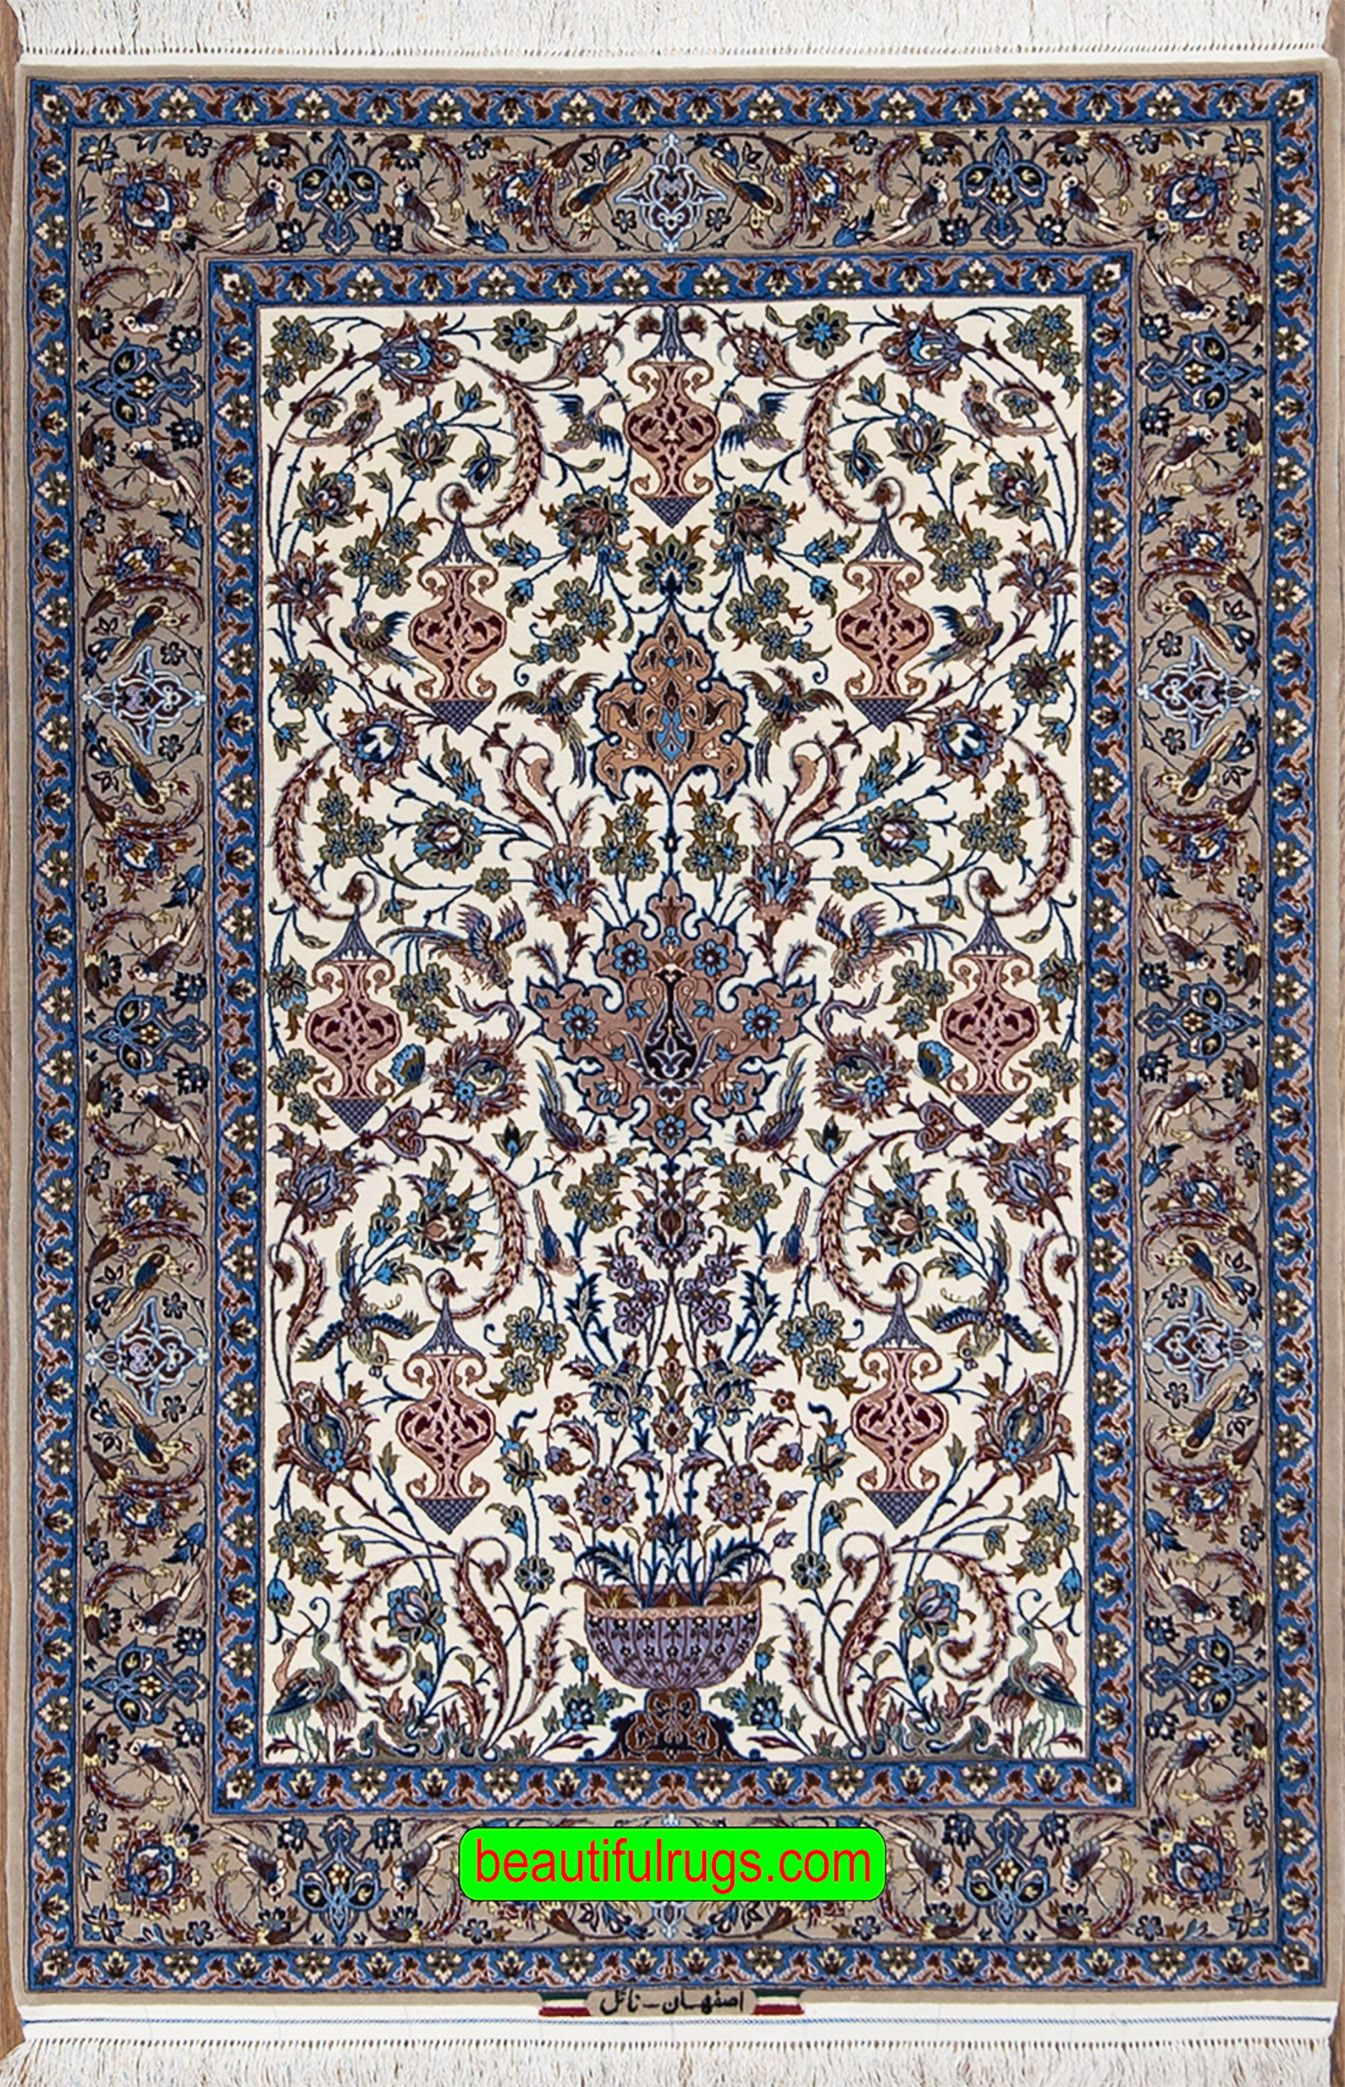 Prime Persian Rugs on Instagram: 💥CLEARANCE SALE! UP TO 50% OFF💥 Shop  4x3 Kashan Rug for R5,999/- only. Shop online or in-store. Free delivery  countrywide. Valid till 31st May'21 T&Cs Apply.